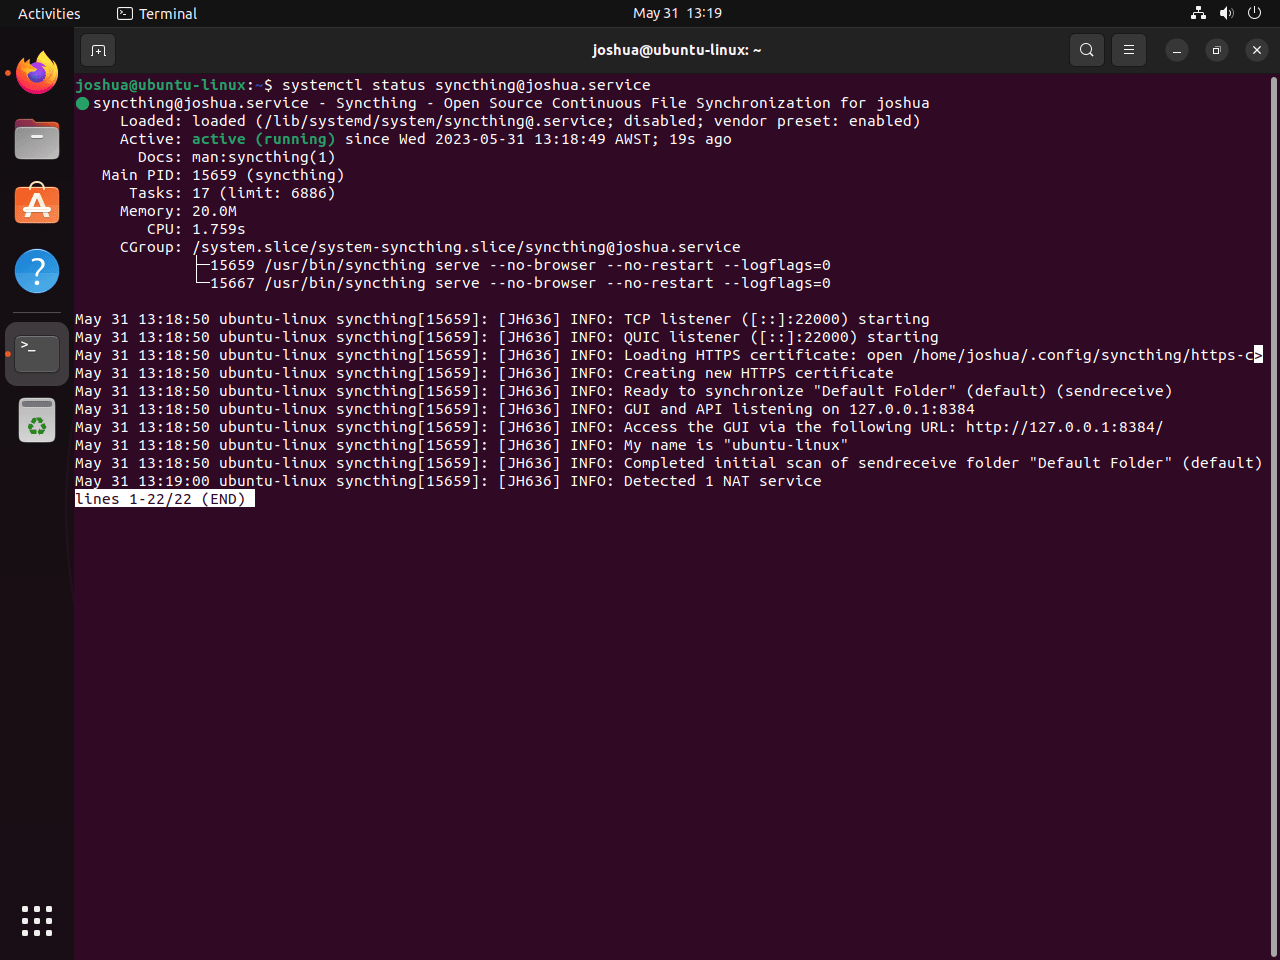 example of syncthing systemd status on ubuntu linux